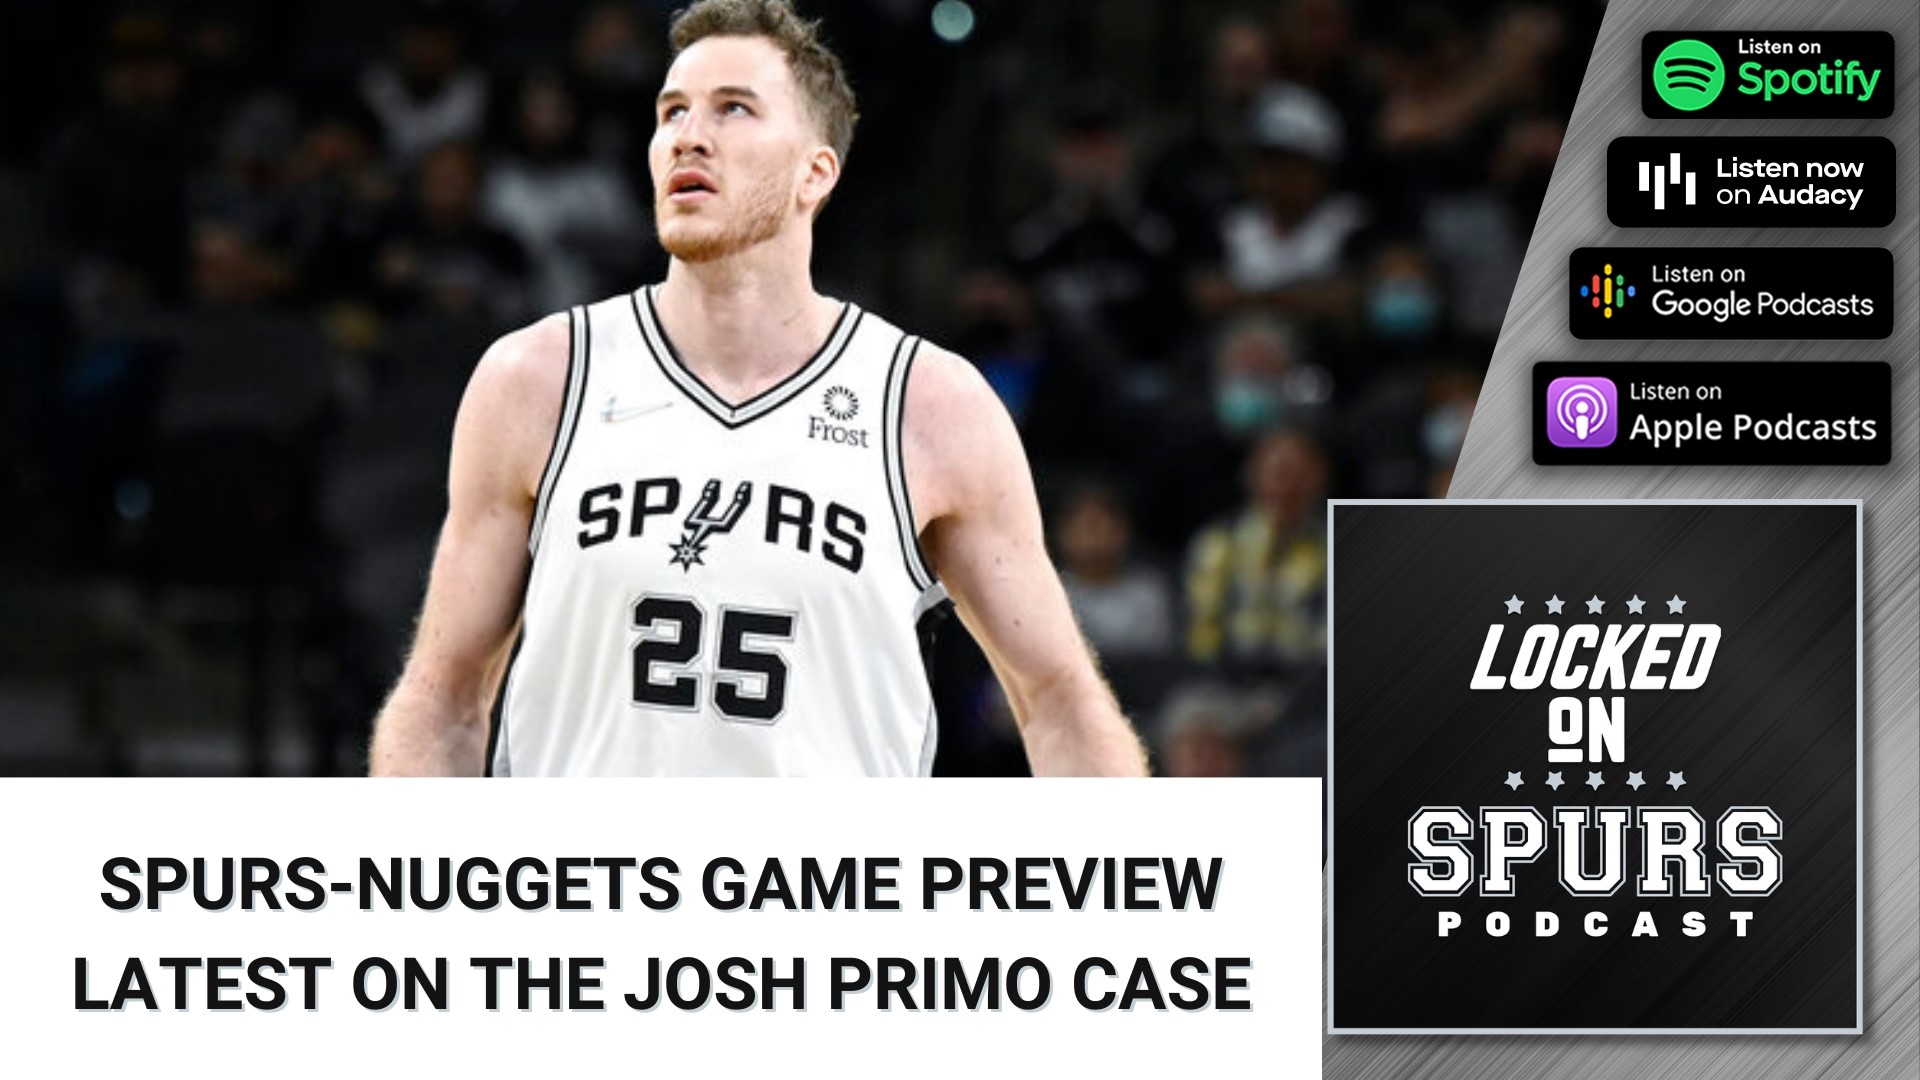 Can the Spurs snap their losing skid tonight versus Denver?